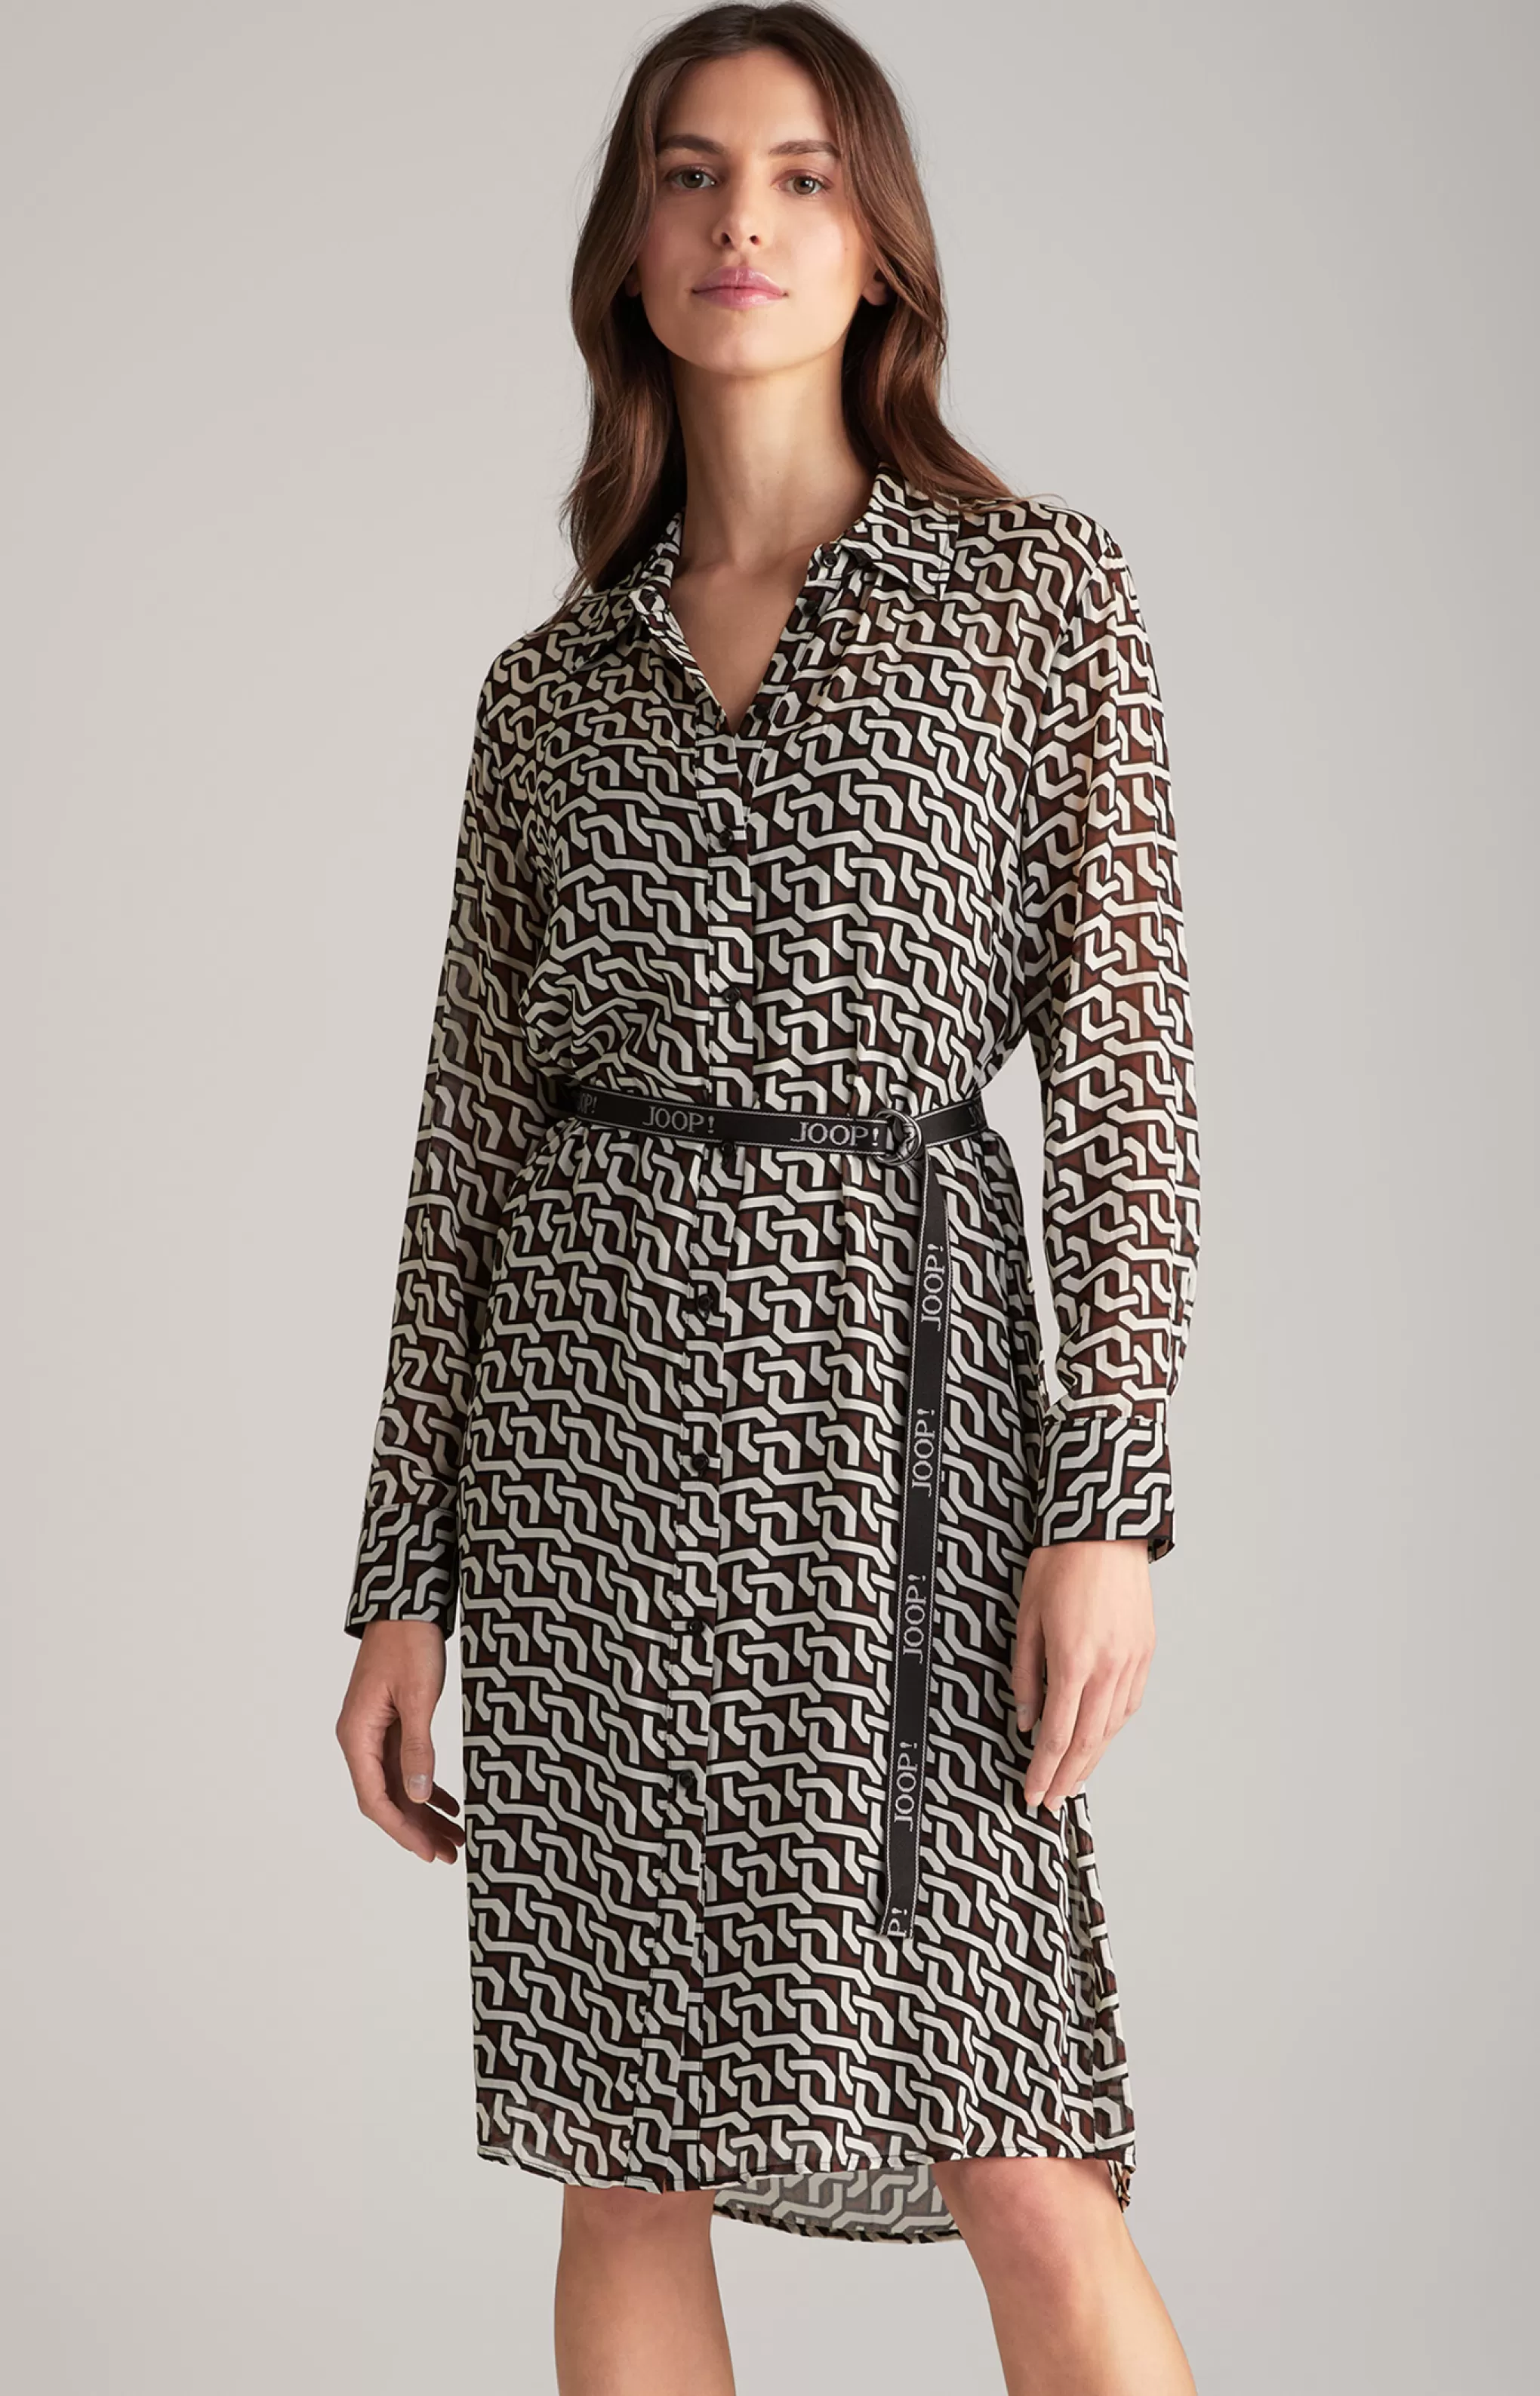 Dresses & Skirts | Clothing*JOOP Dresses & Skirts | Clothing Georgette Shirt Dress in a Pattern